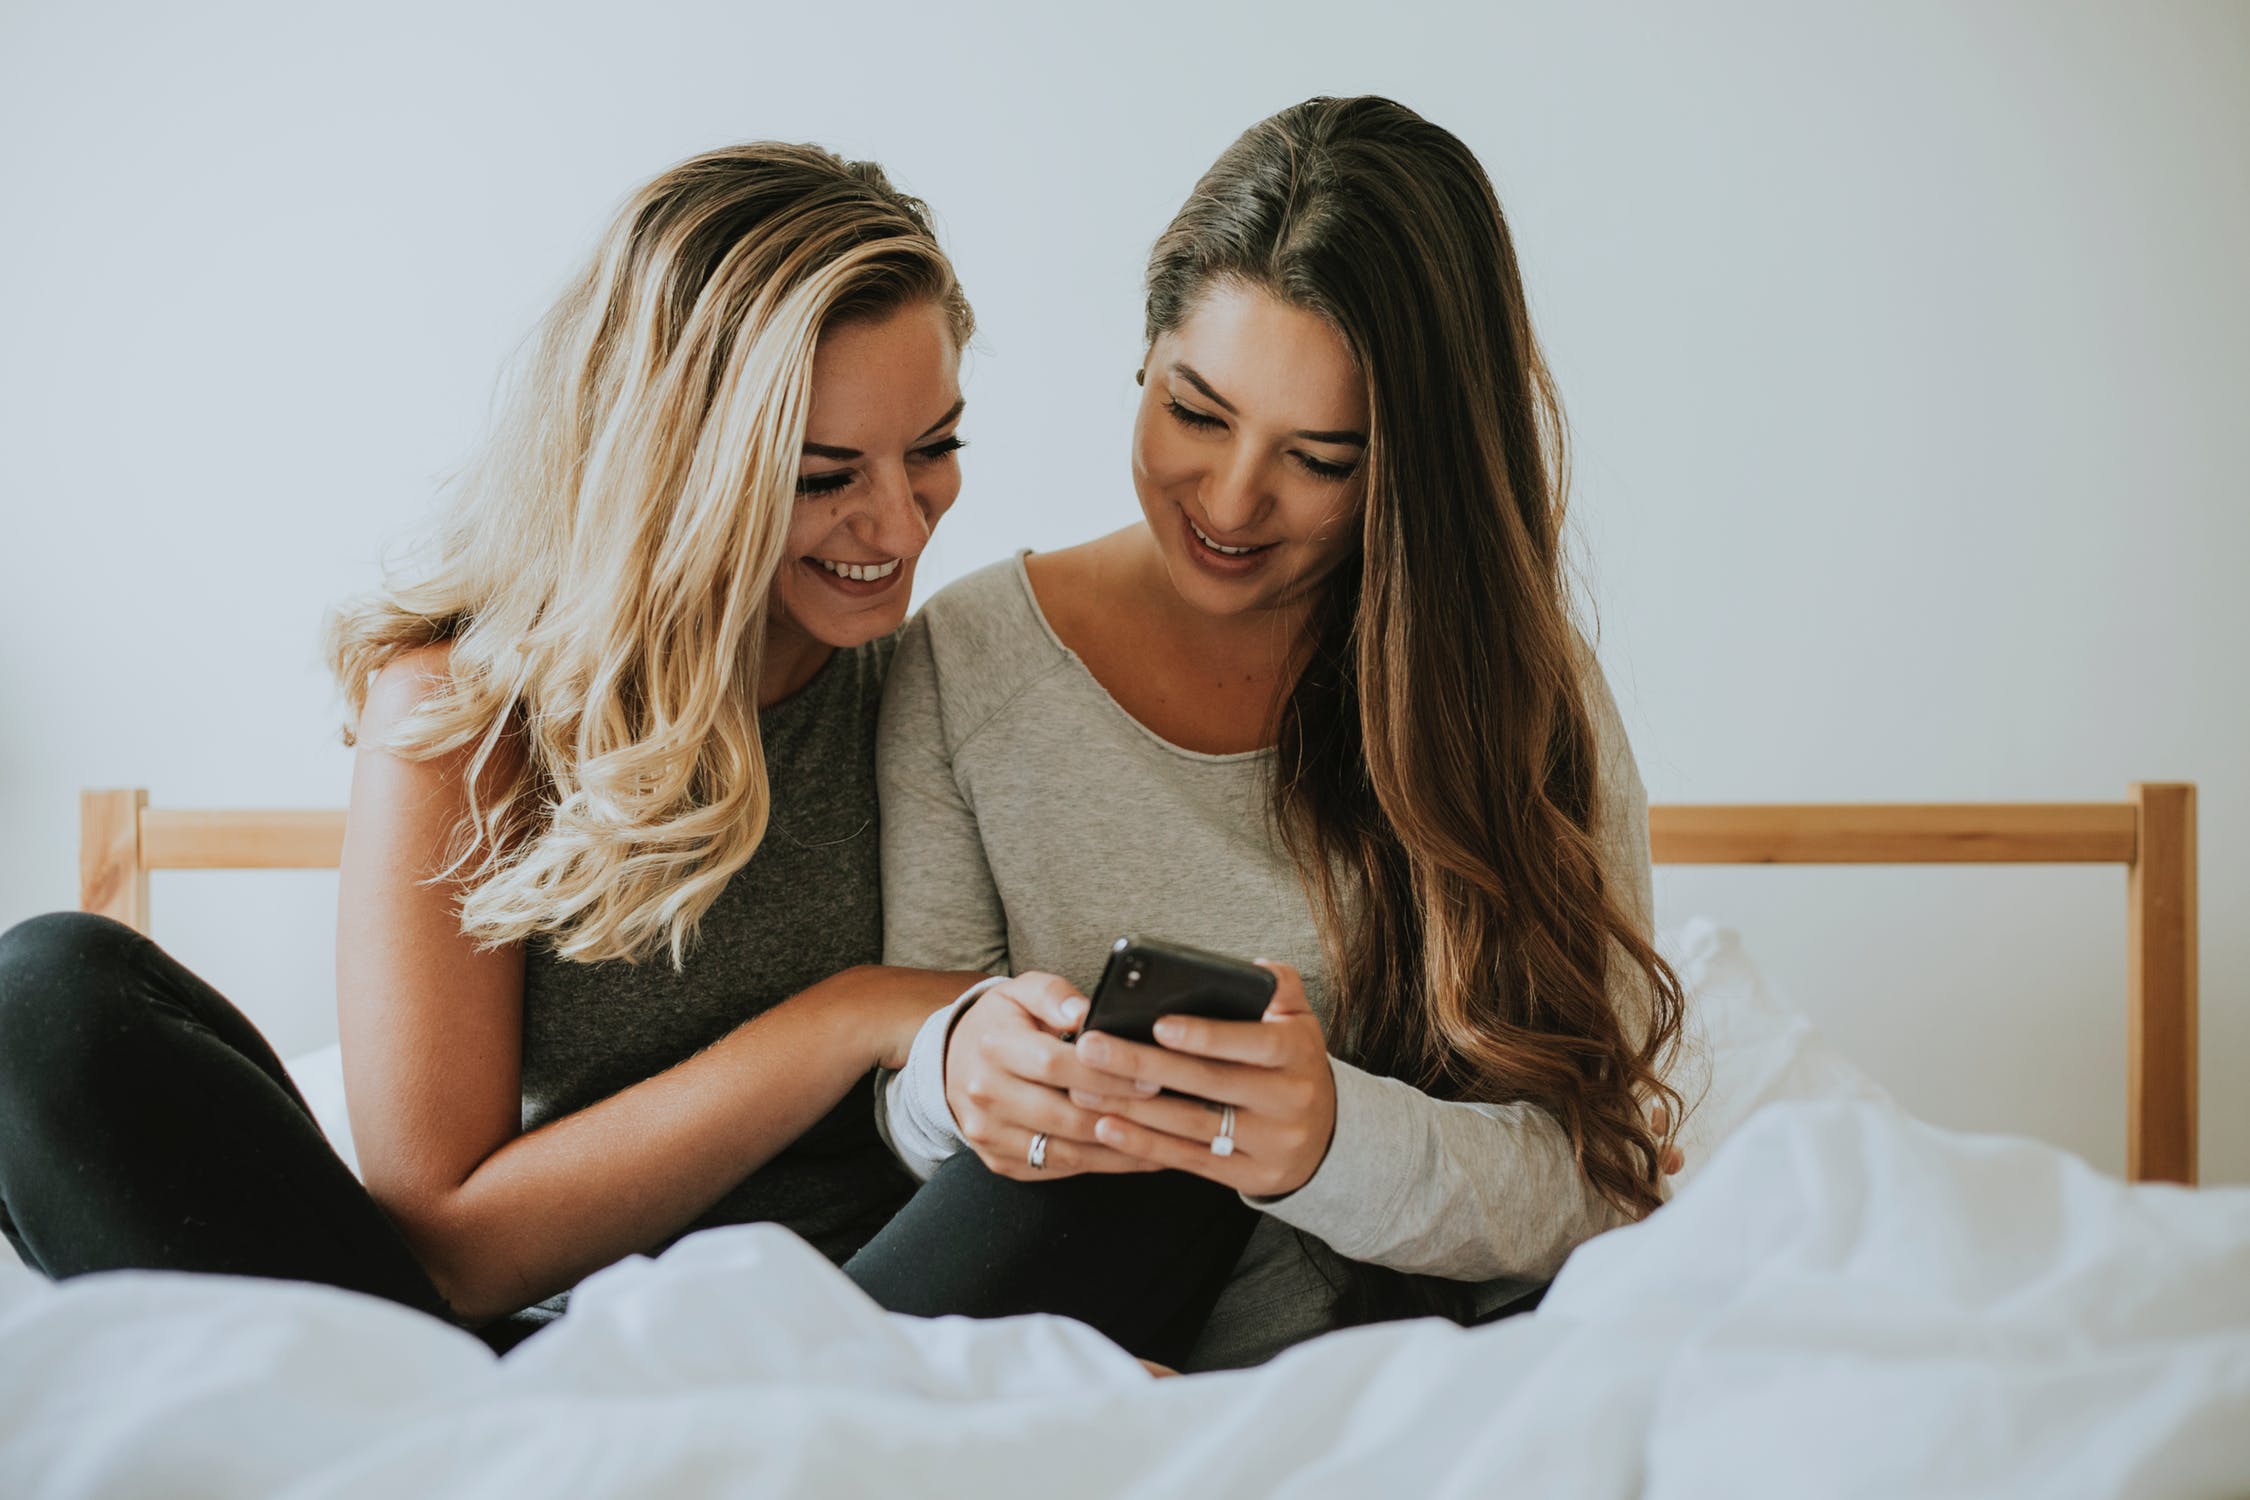 image of teen girls on bed looking at phone sexting sextortion selfie